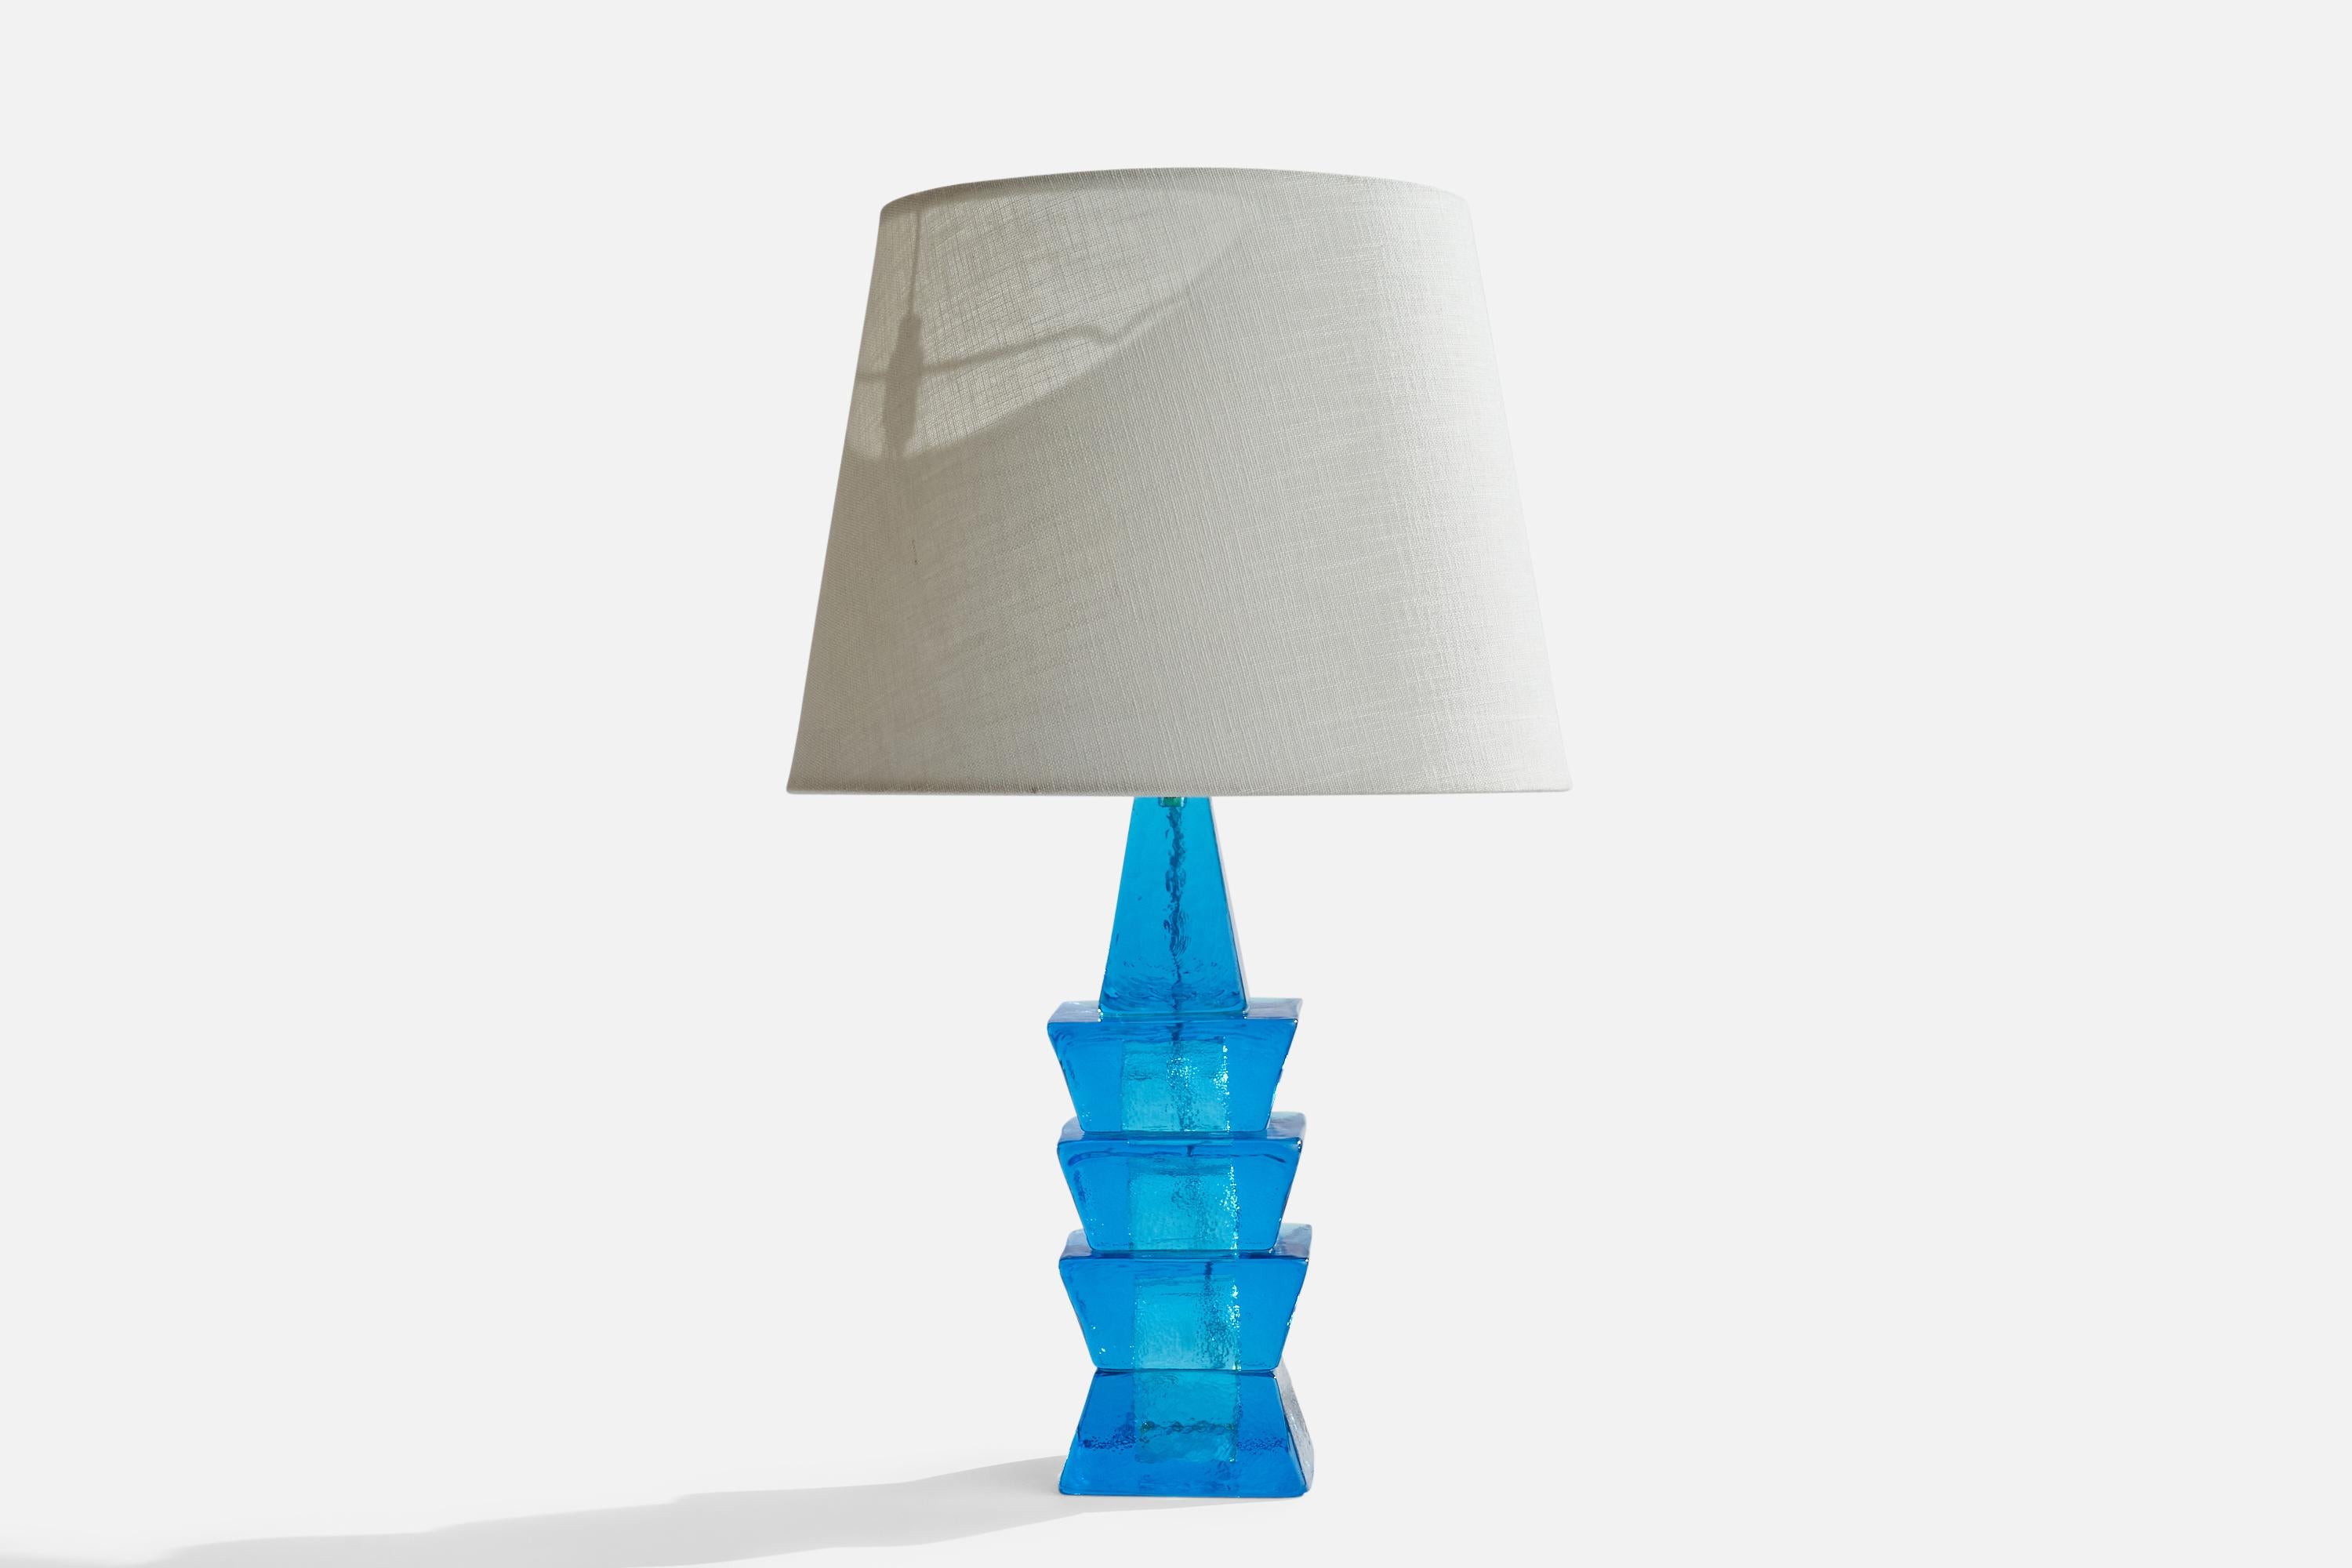 A blue-coloured glass table lamp designed and produced by Ateljé Engberg, Urshult, Sweden, c. 1970s.

Dimensions of Lamp (inches): 14” H x 3.75” Diameter
Dimensions of Shade (inches): 9” Top Diameter x 12”  Bottom Diameter x 9.25” H
Dimensions of